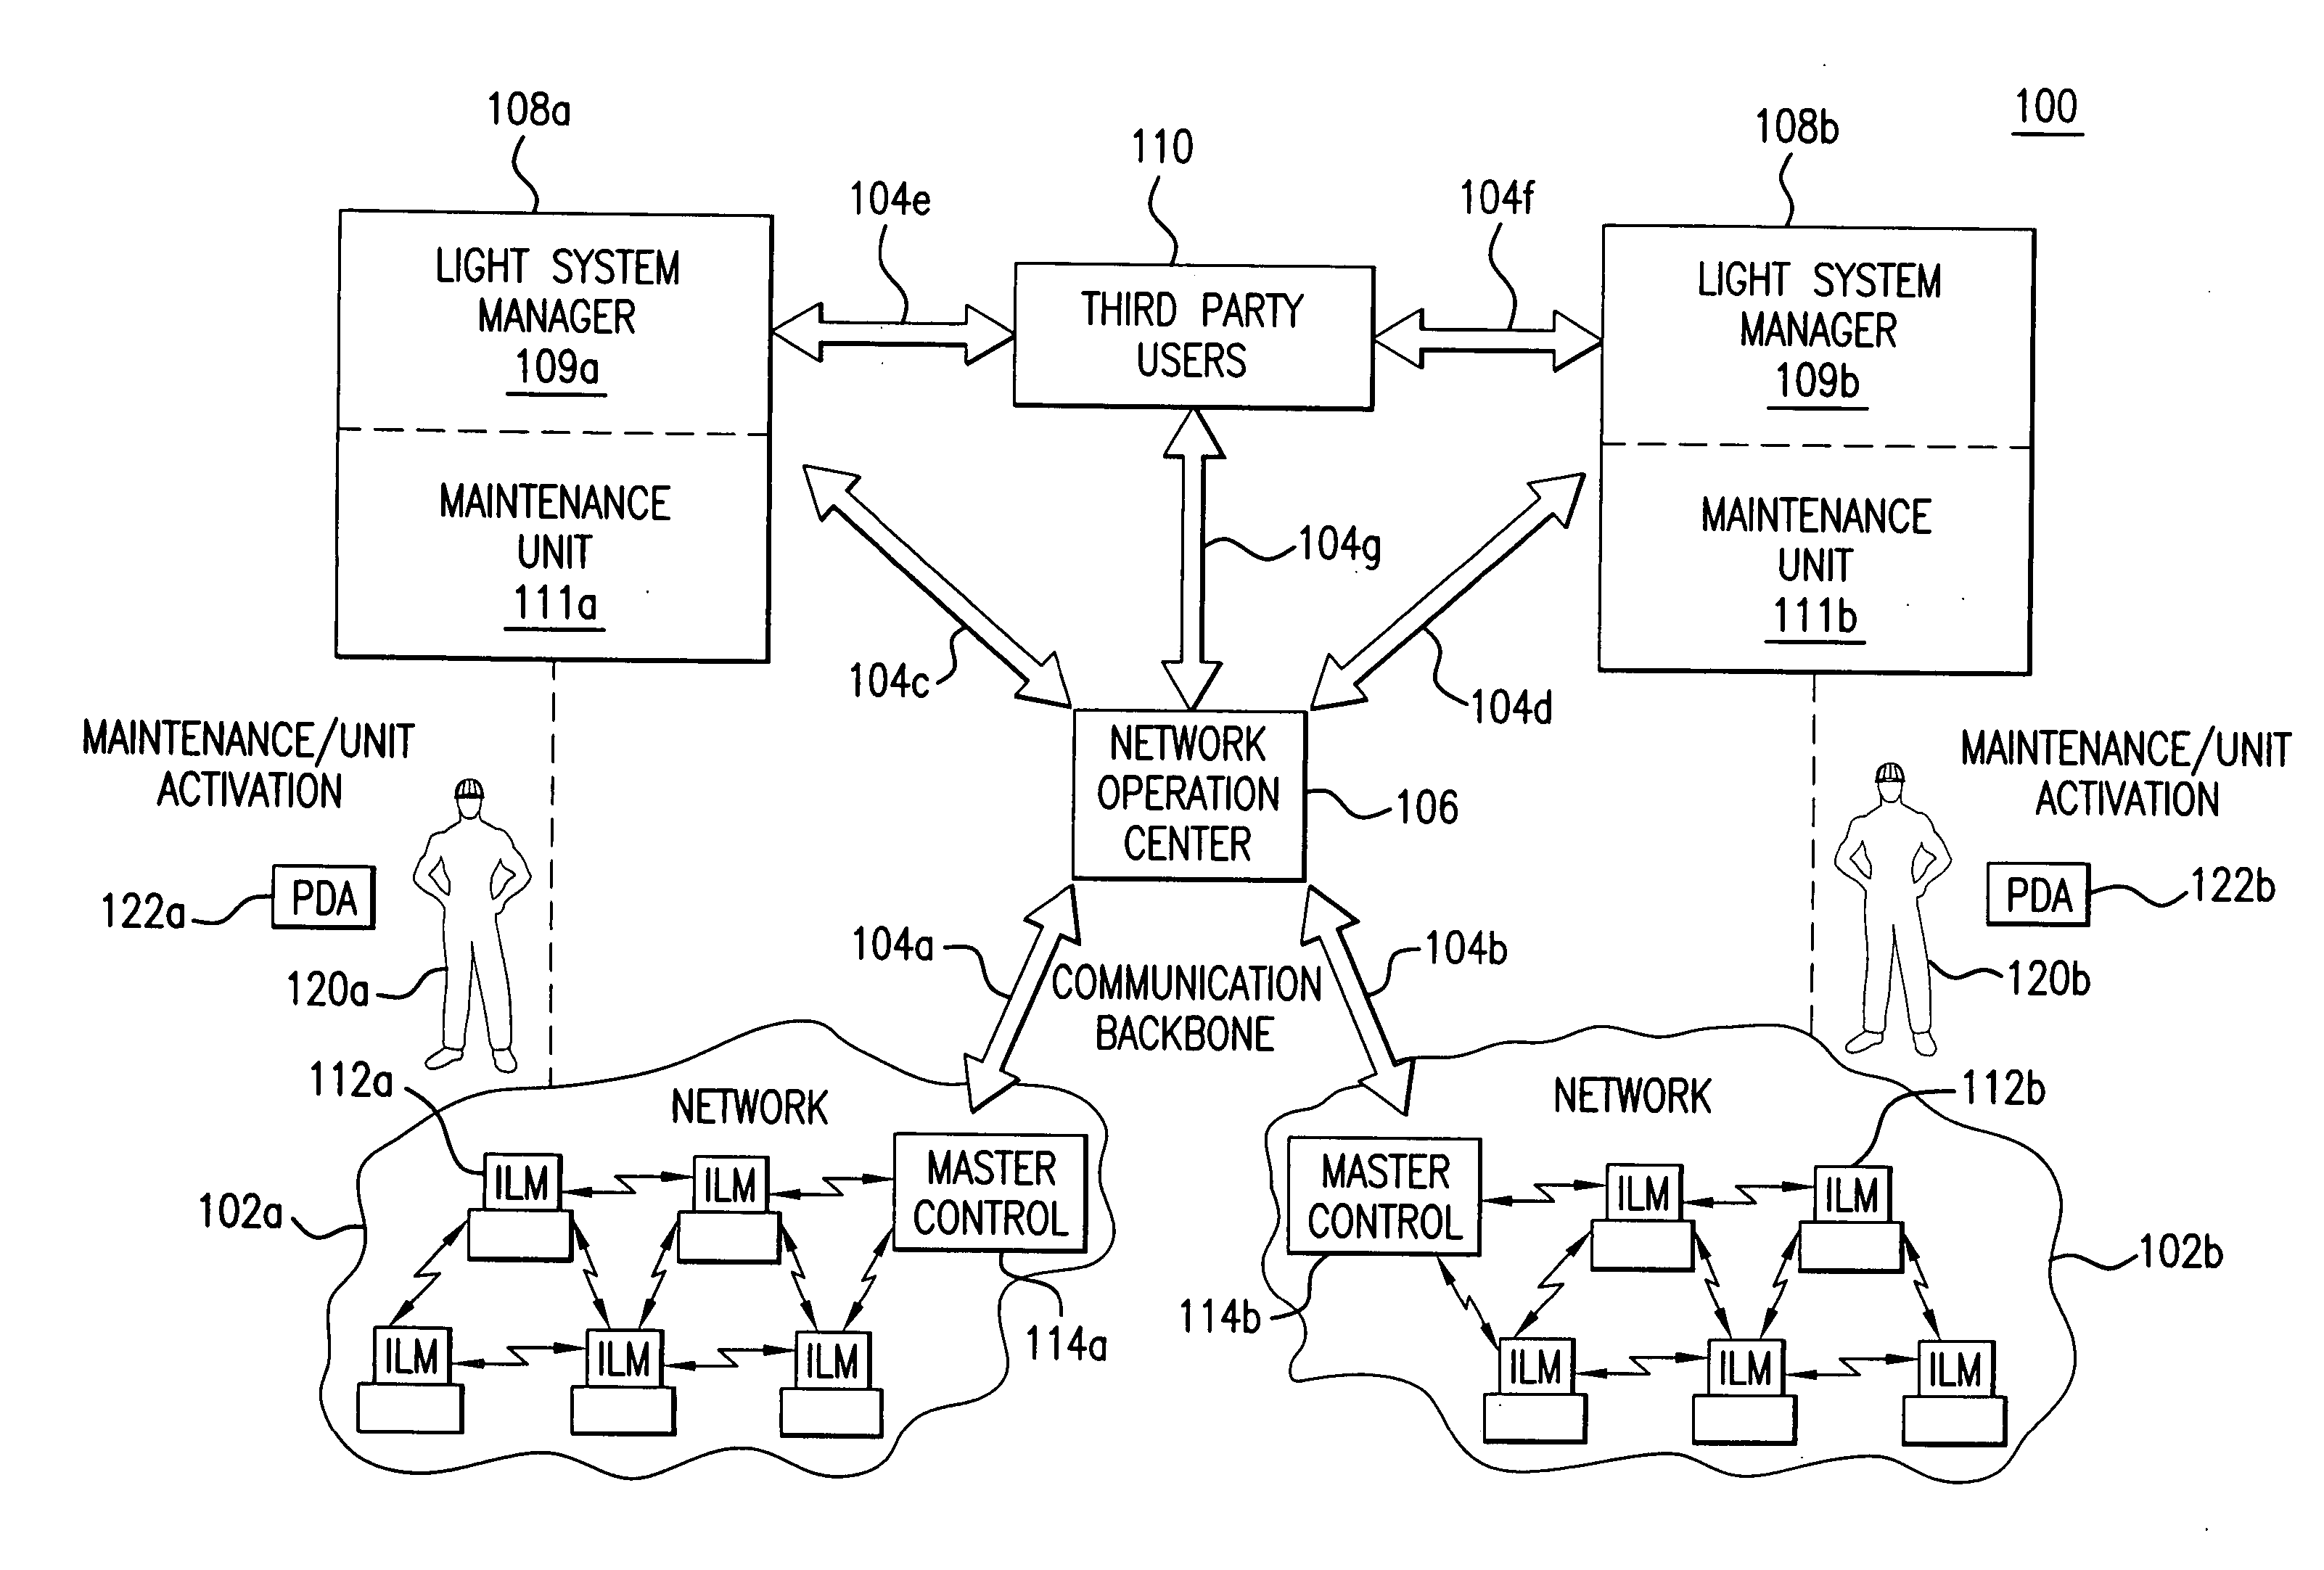 Light management system having networked intelligent luminaire managers with enhanced diagnostics capabilities